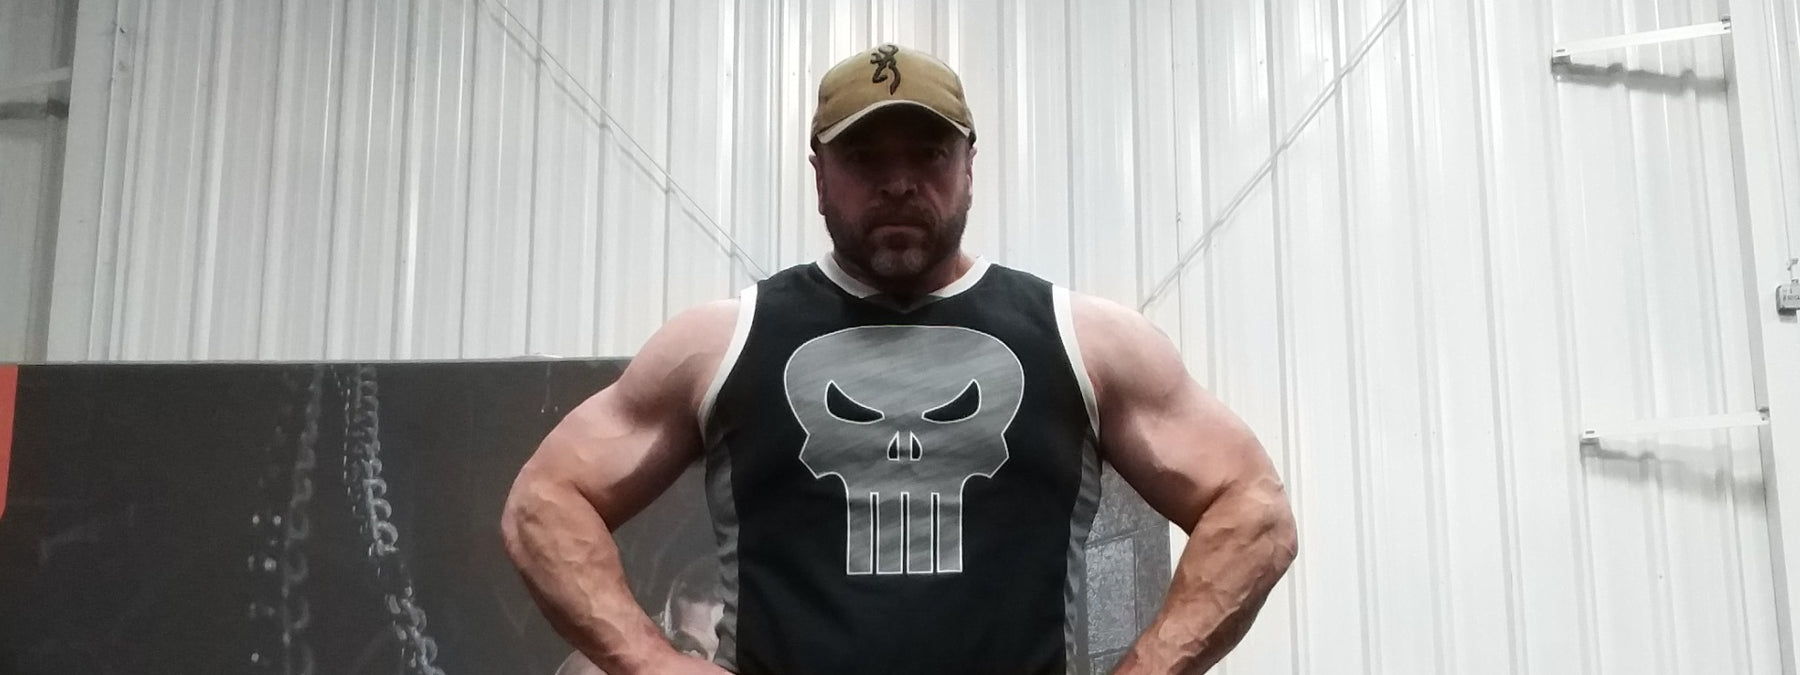 Powerlifter Steve Shaw Loses 104 Pounds